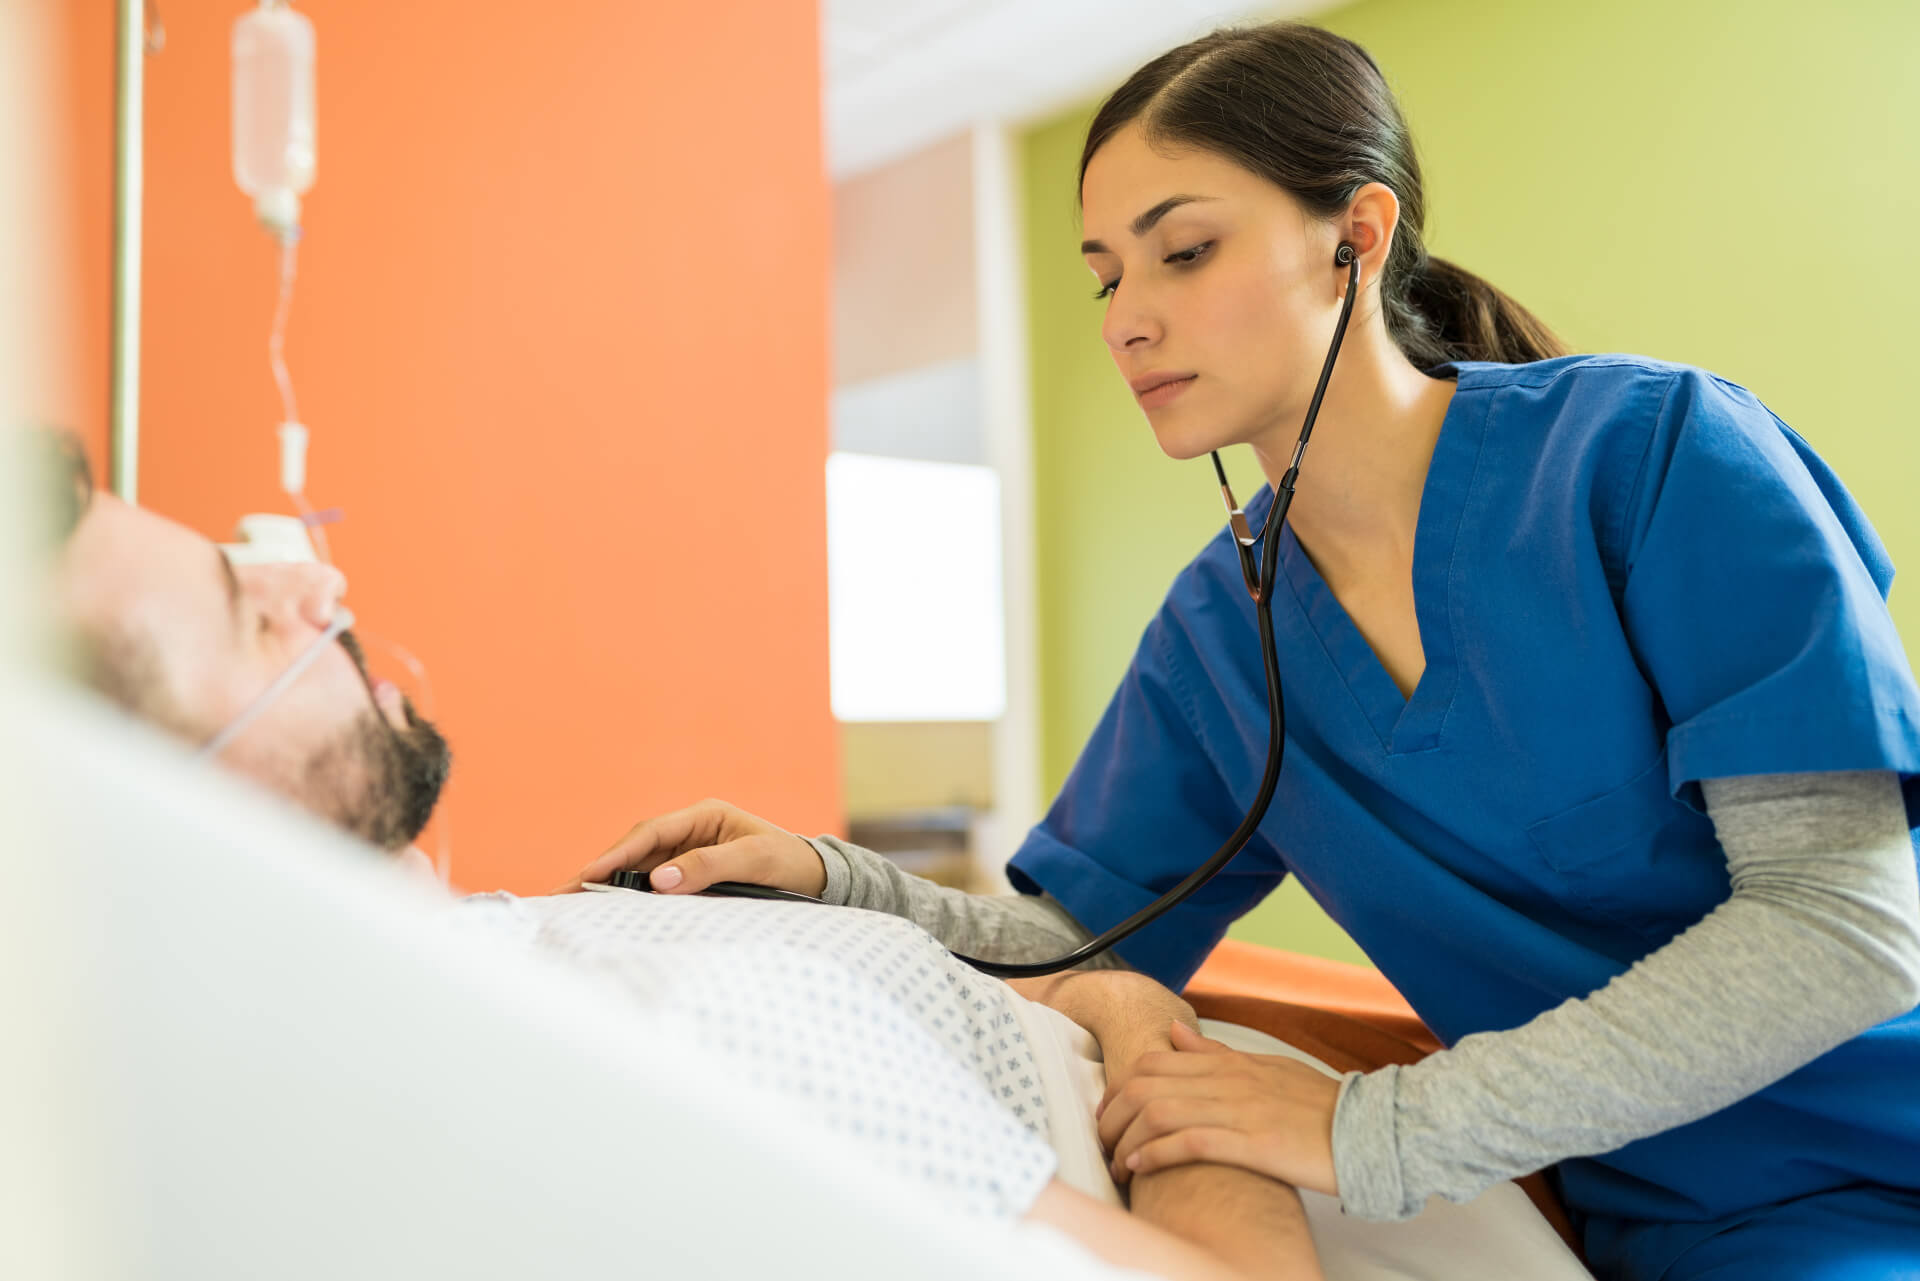 Urgent Care vs Emergency Room: The Key Differences